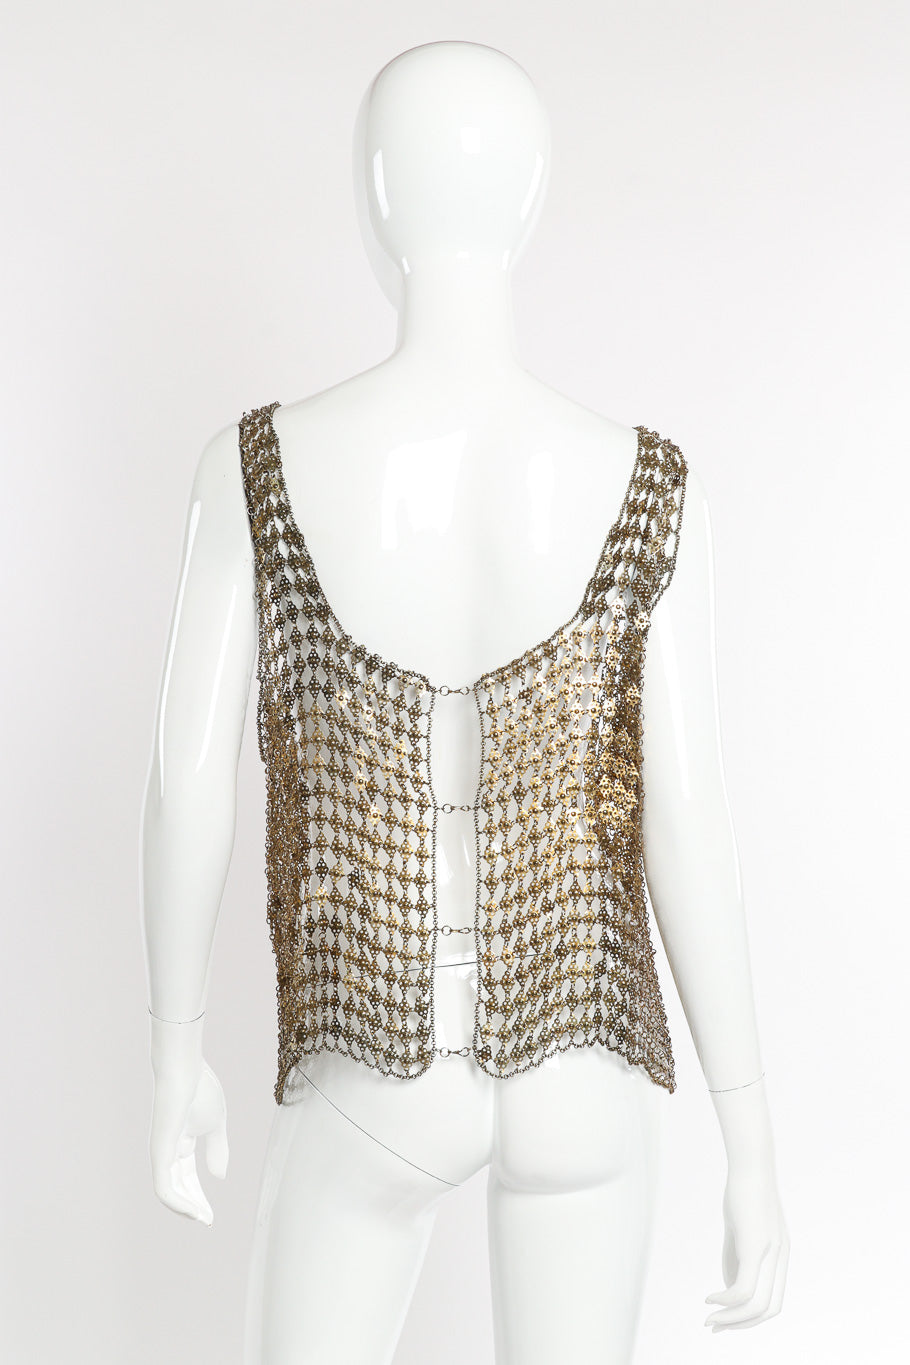 Vintage Chain Mail Tank Top back view on mannequin @recessla